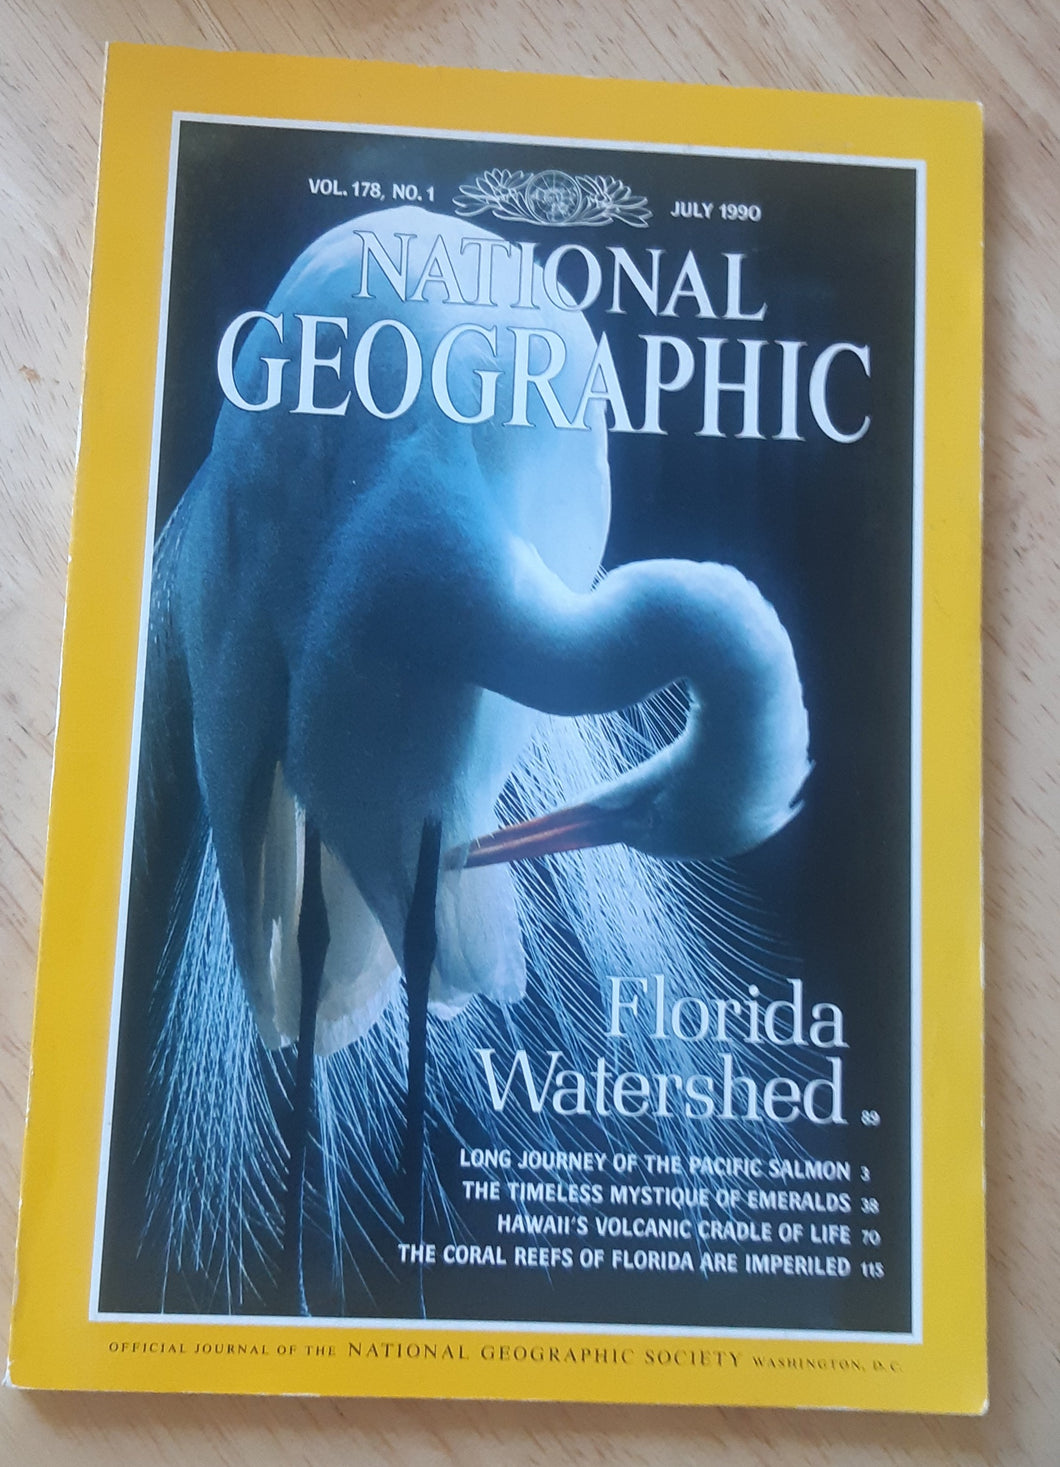 National Geographic - July 1990 (Vol. 178, No. 1)